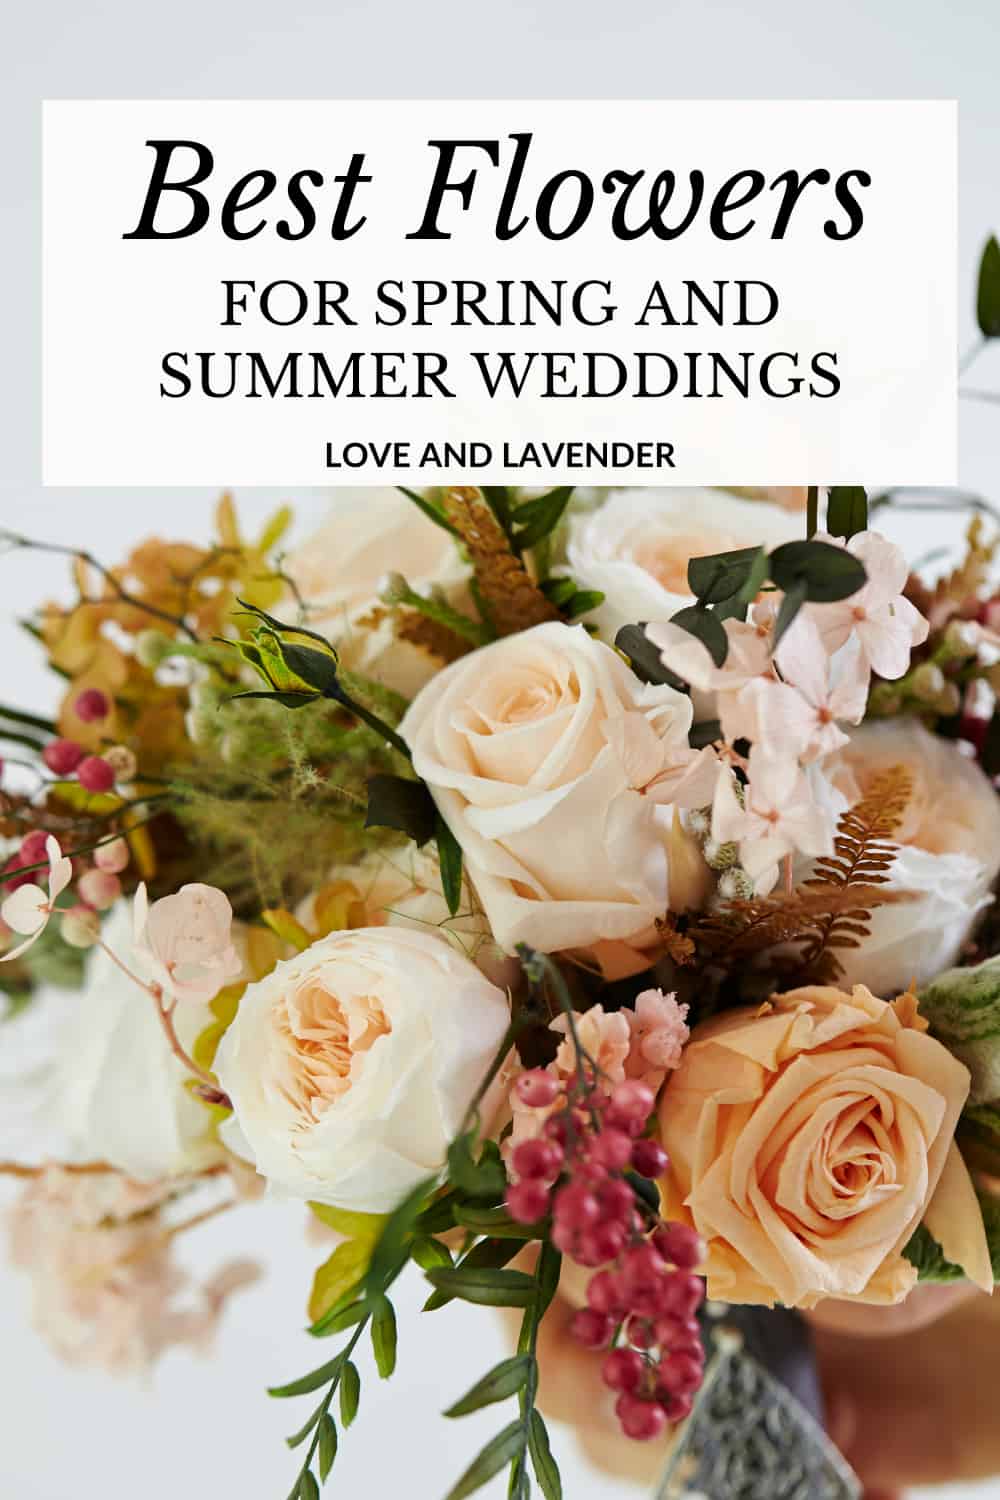 15 Popular Spring and Summer Flowers for Bridal Bouquets